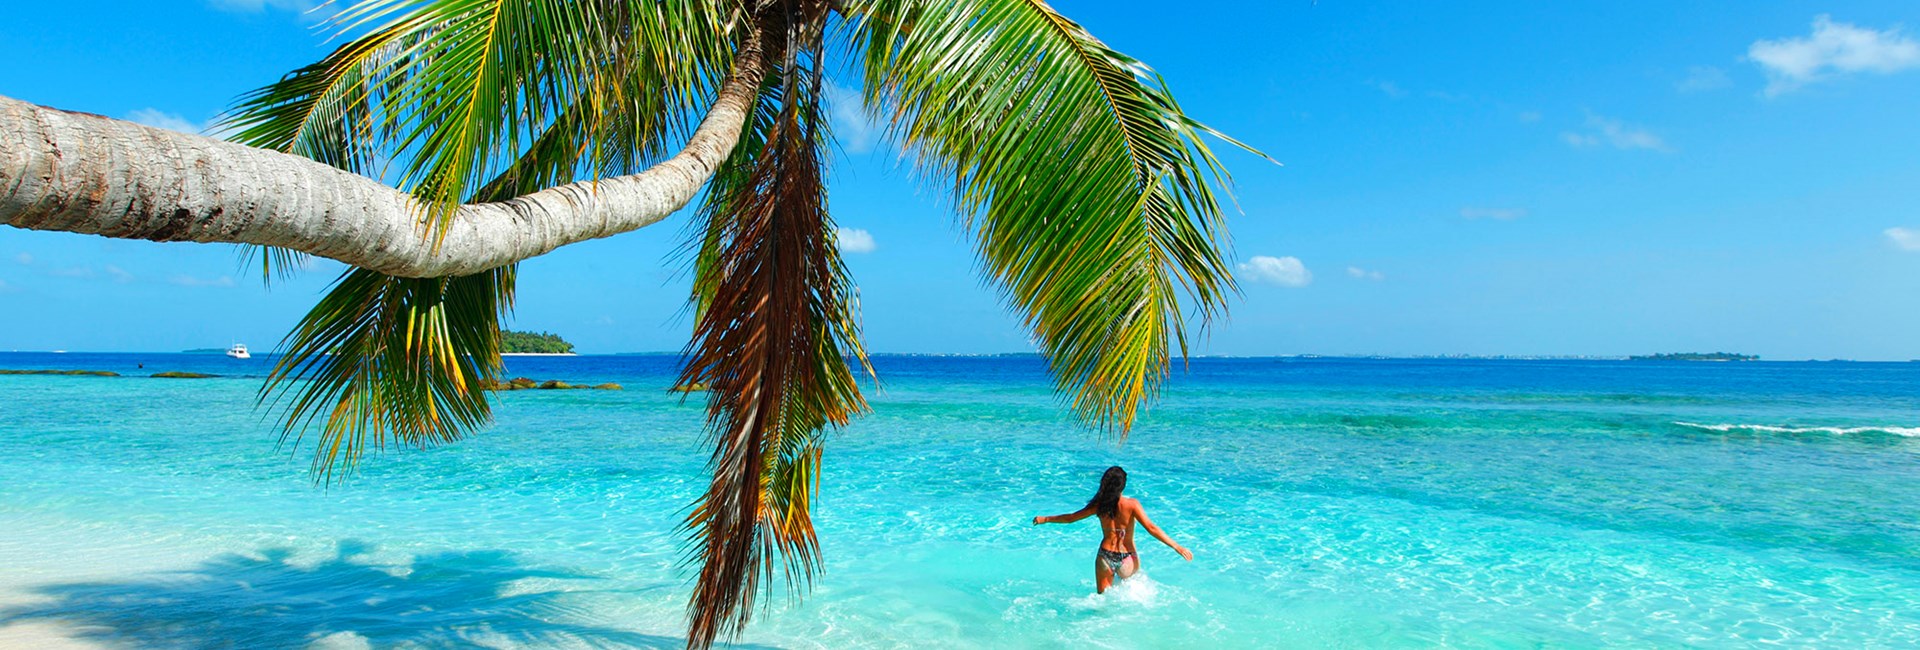 woman with arms out splashing in turquoise sea beyond beach and palm tree